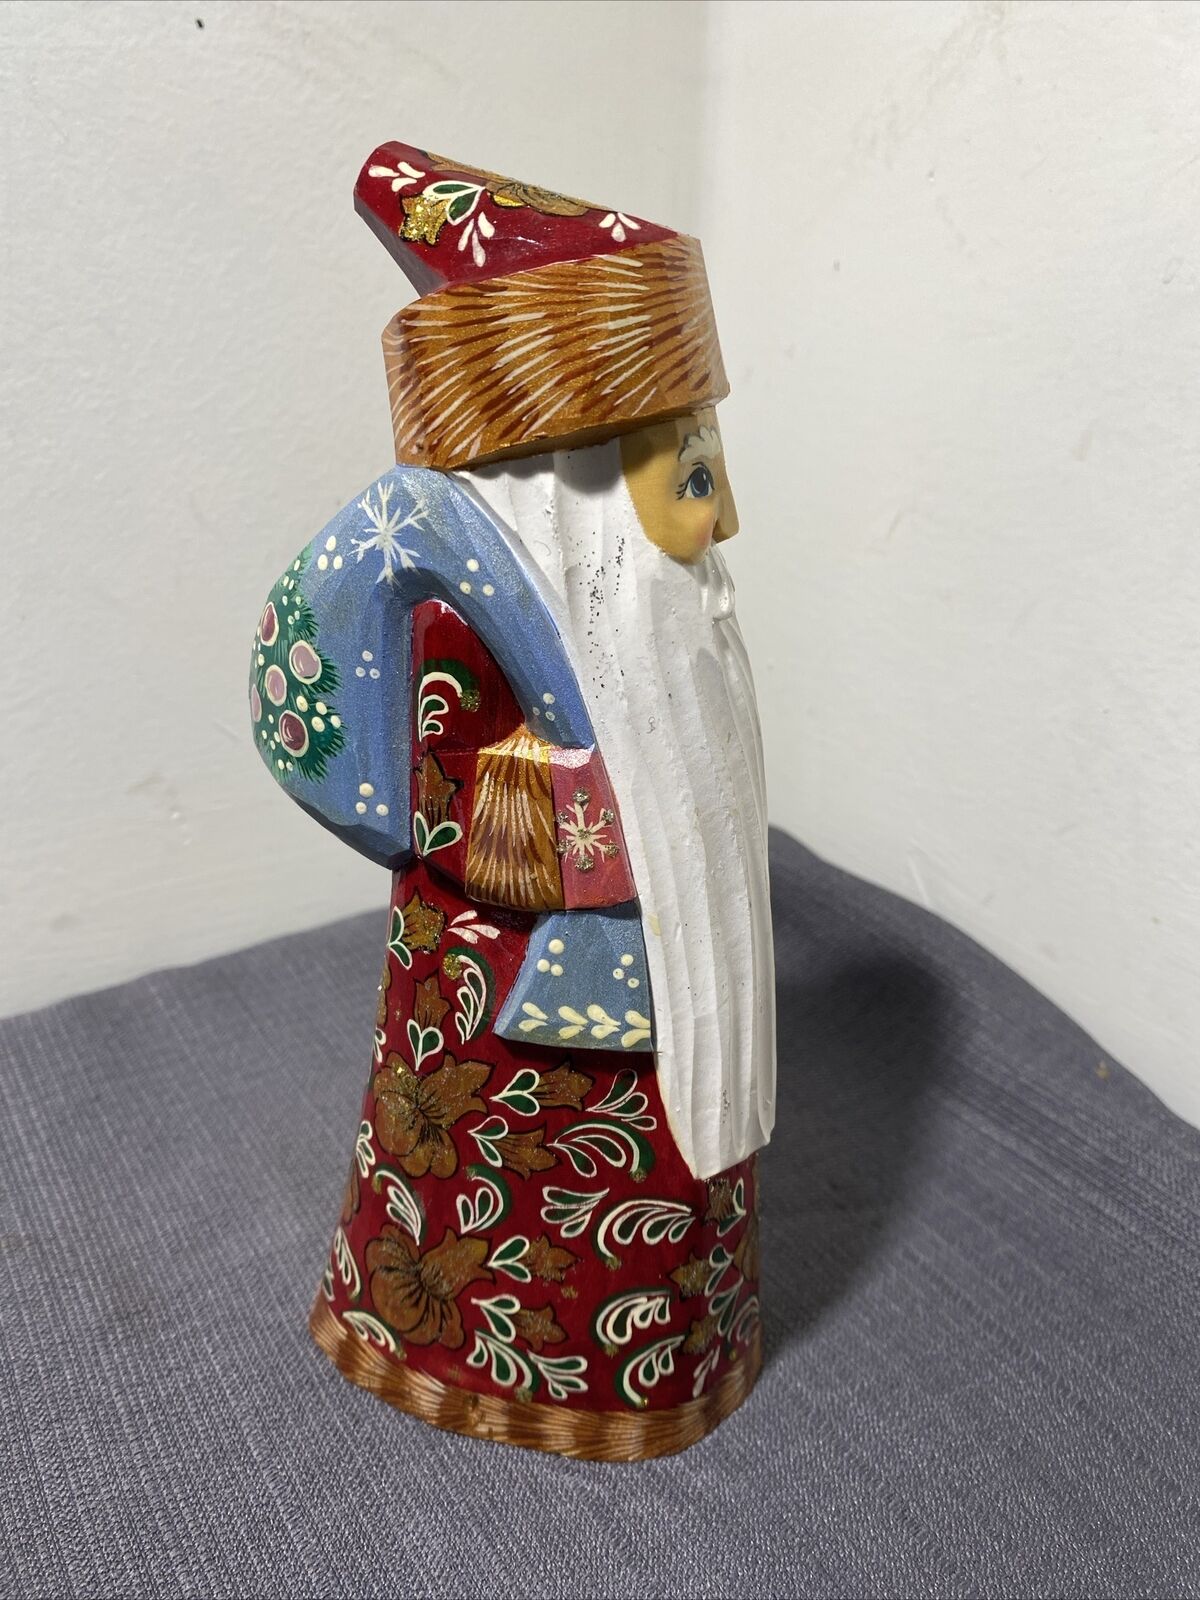 8” Tall Russian Santa Claus’s Figurine Hand Carved And Painted Signed By Artist